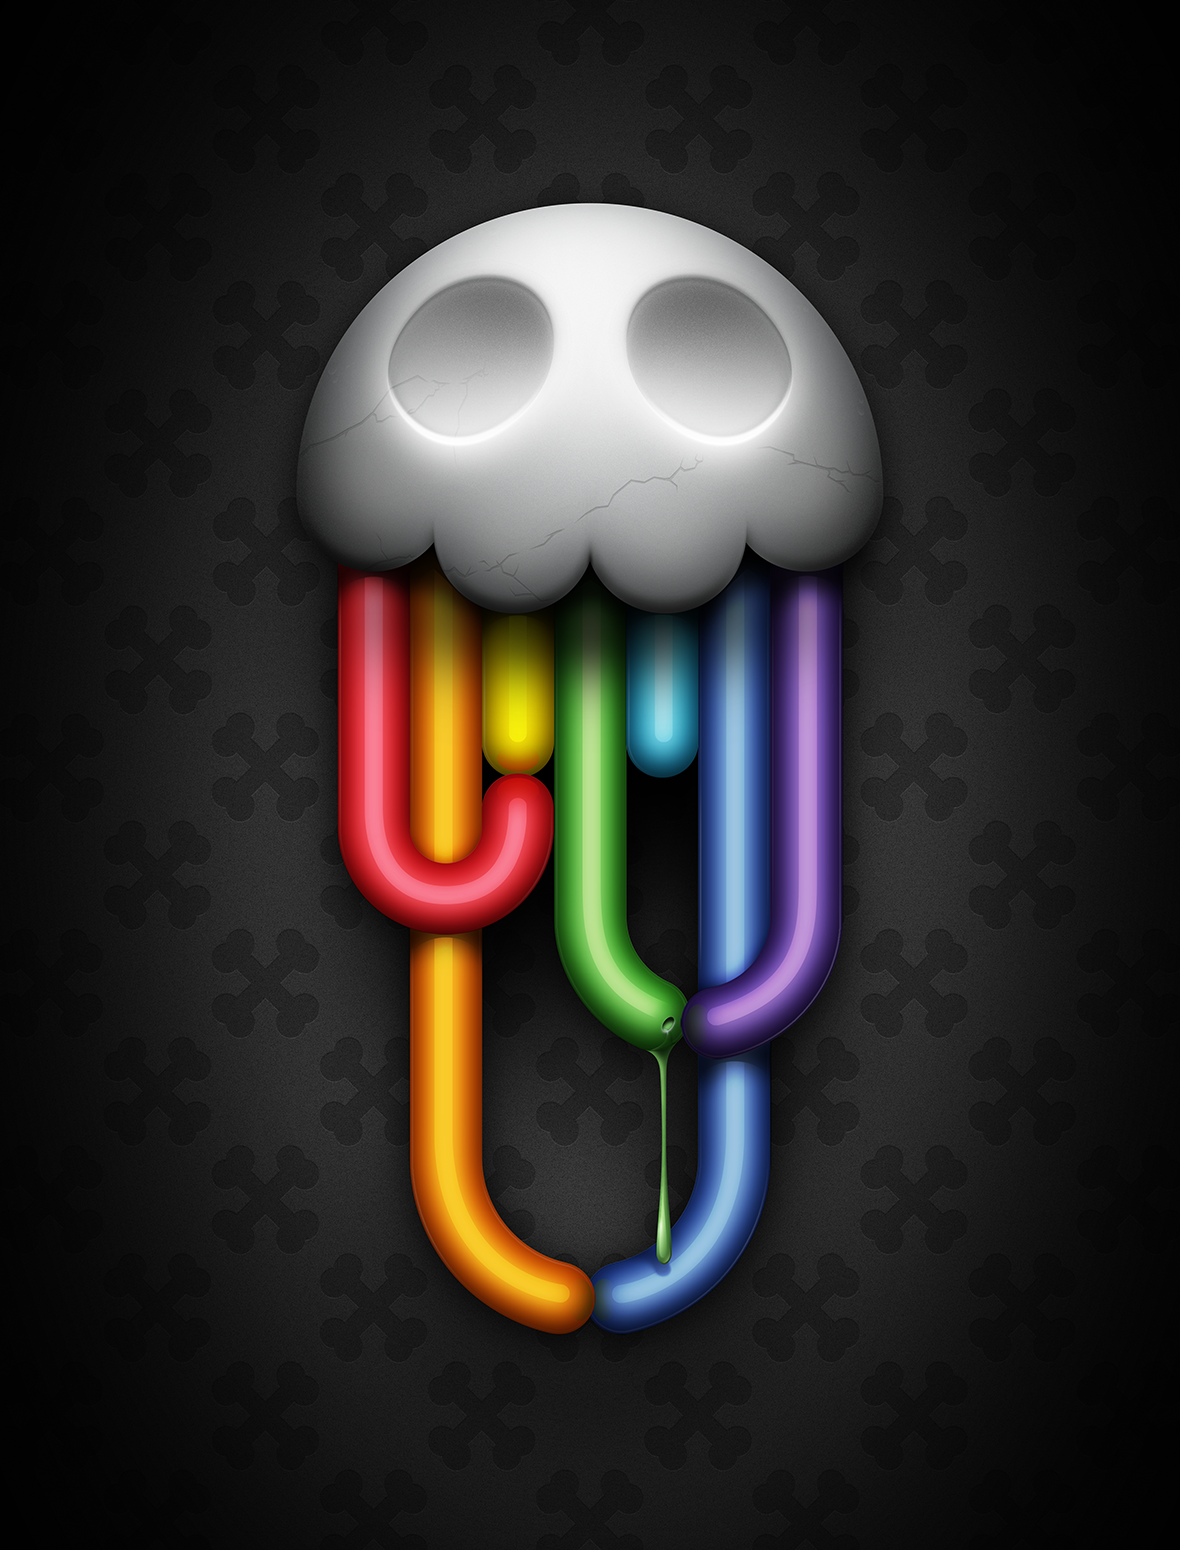 material_iconic_illustration_andre_levy_zhion_rainbow_skull_character_surreal_pop.png